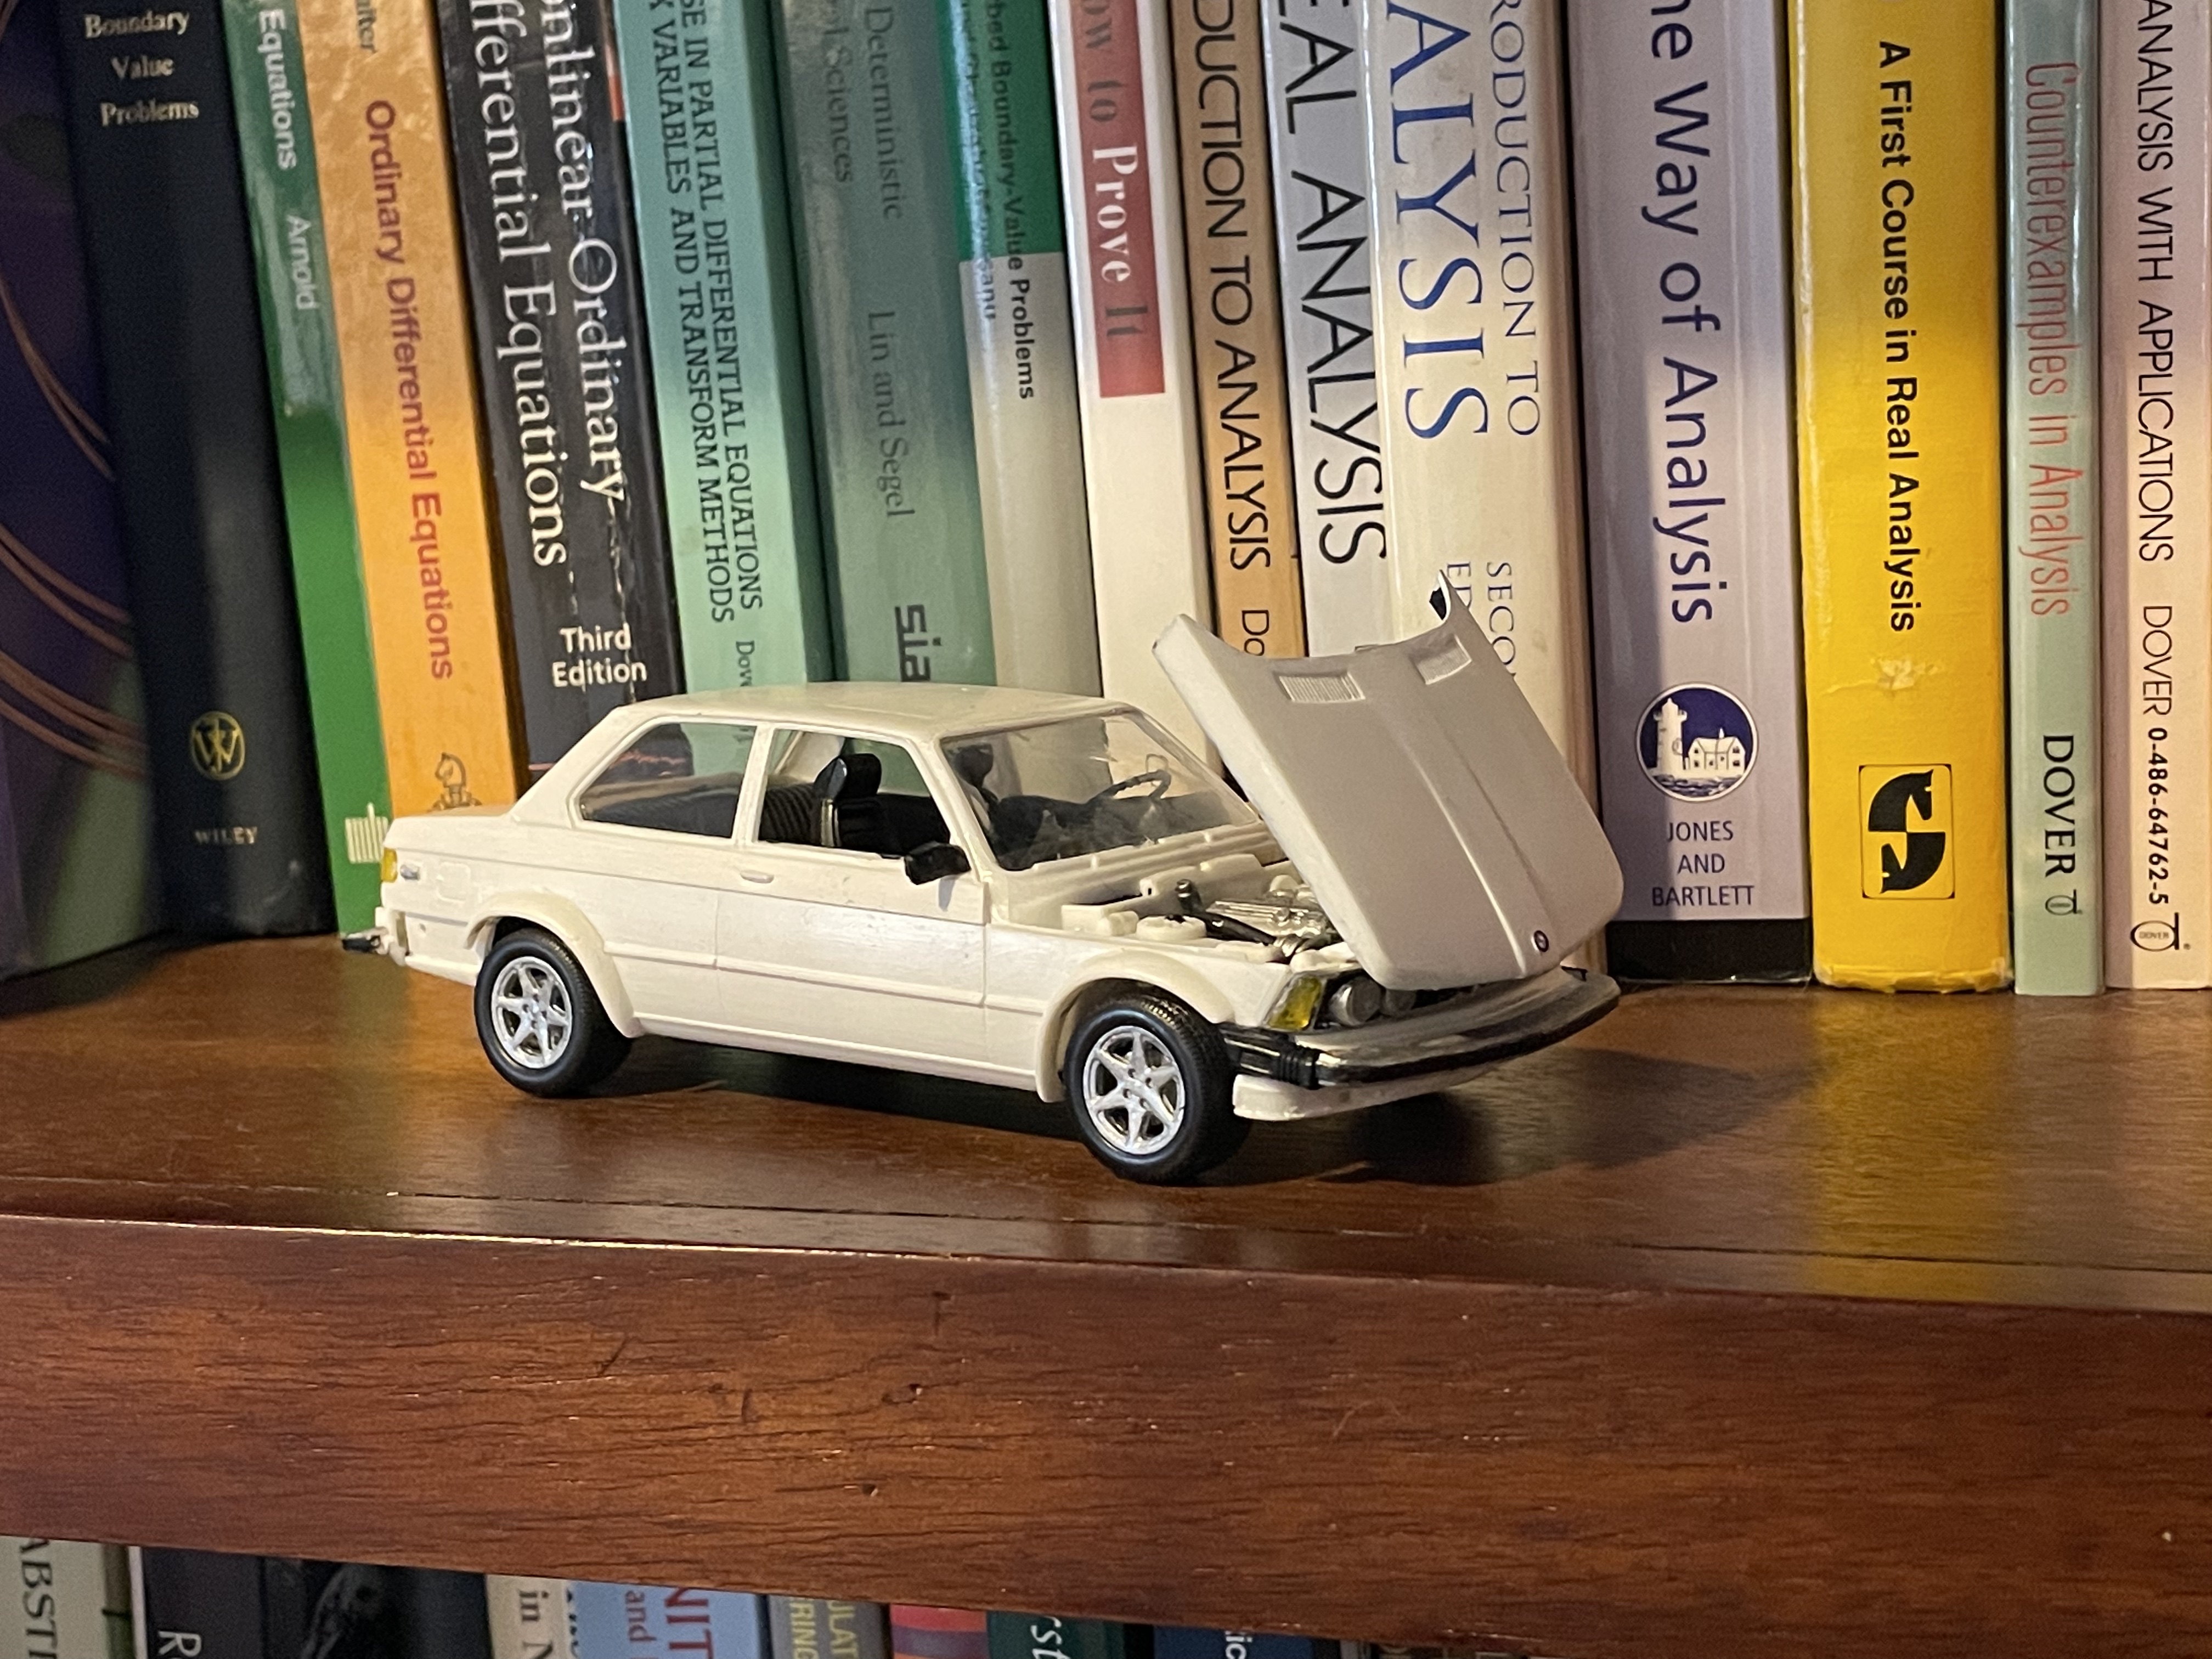 A scale model of a white 1980s BMW, hood open